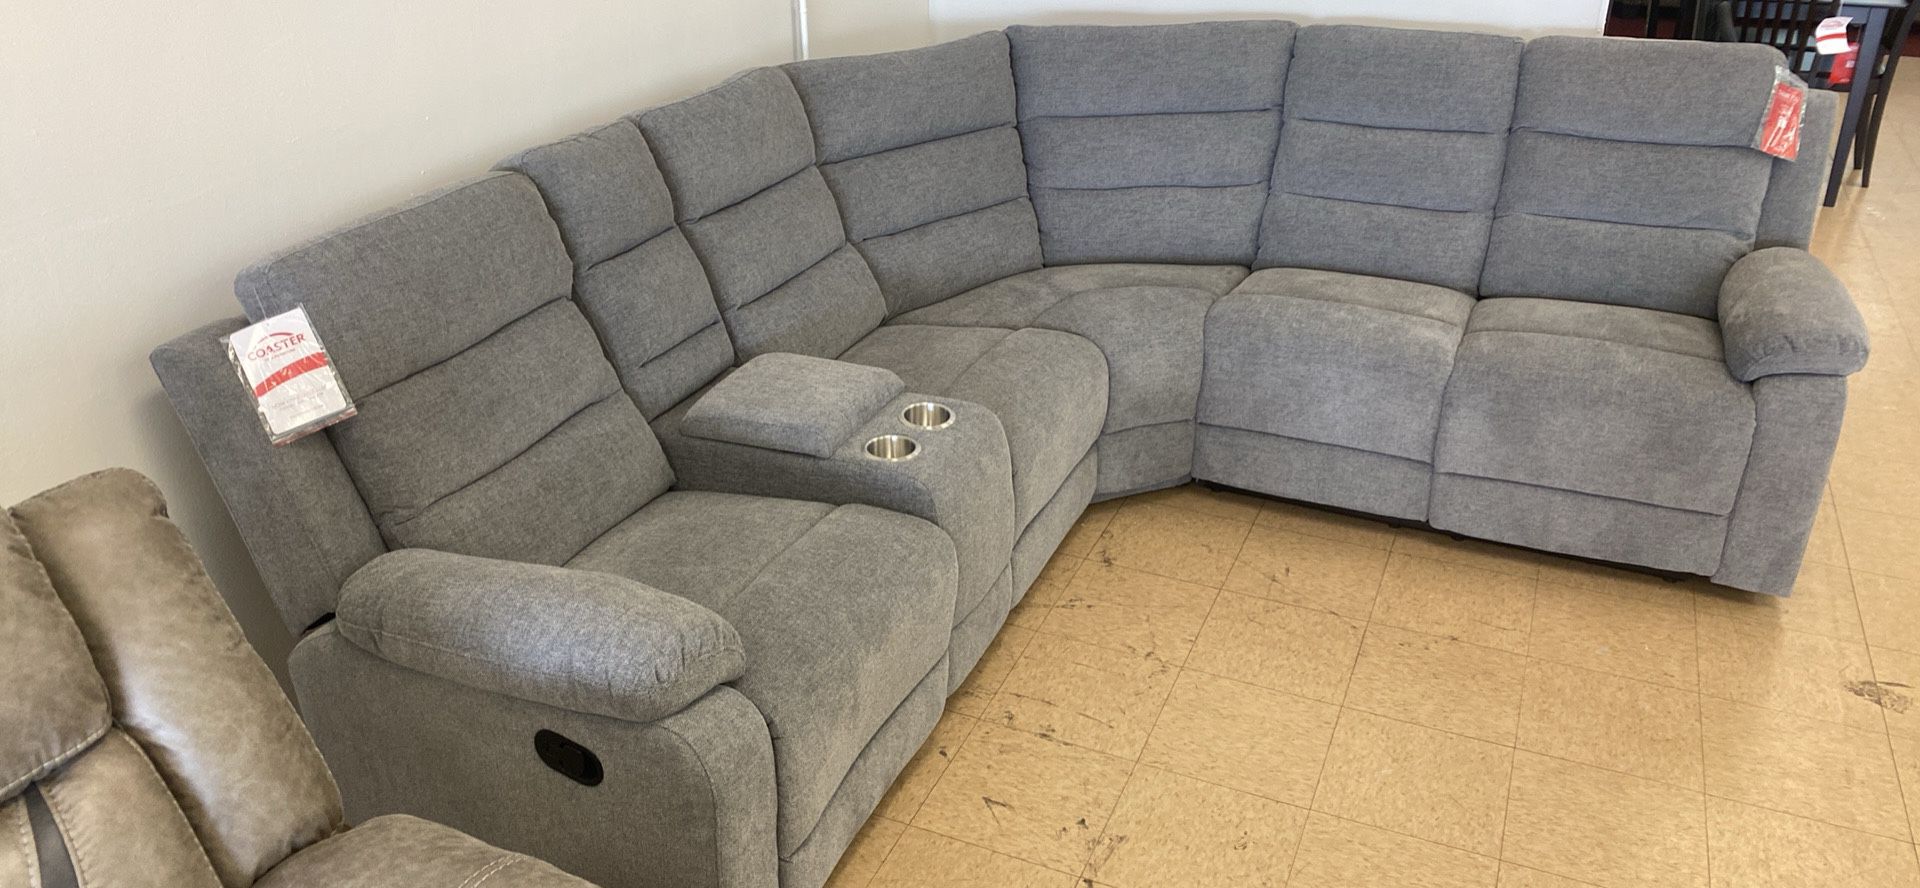 New Sectional And Sofa Sale!